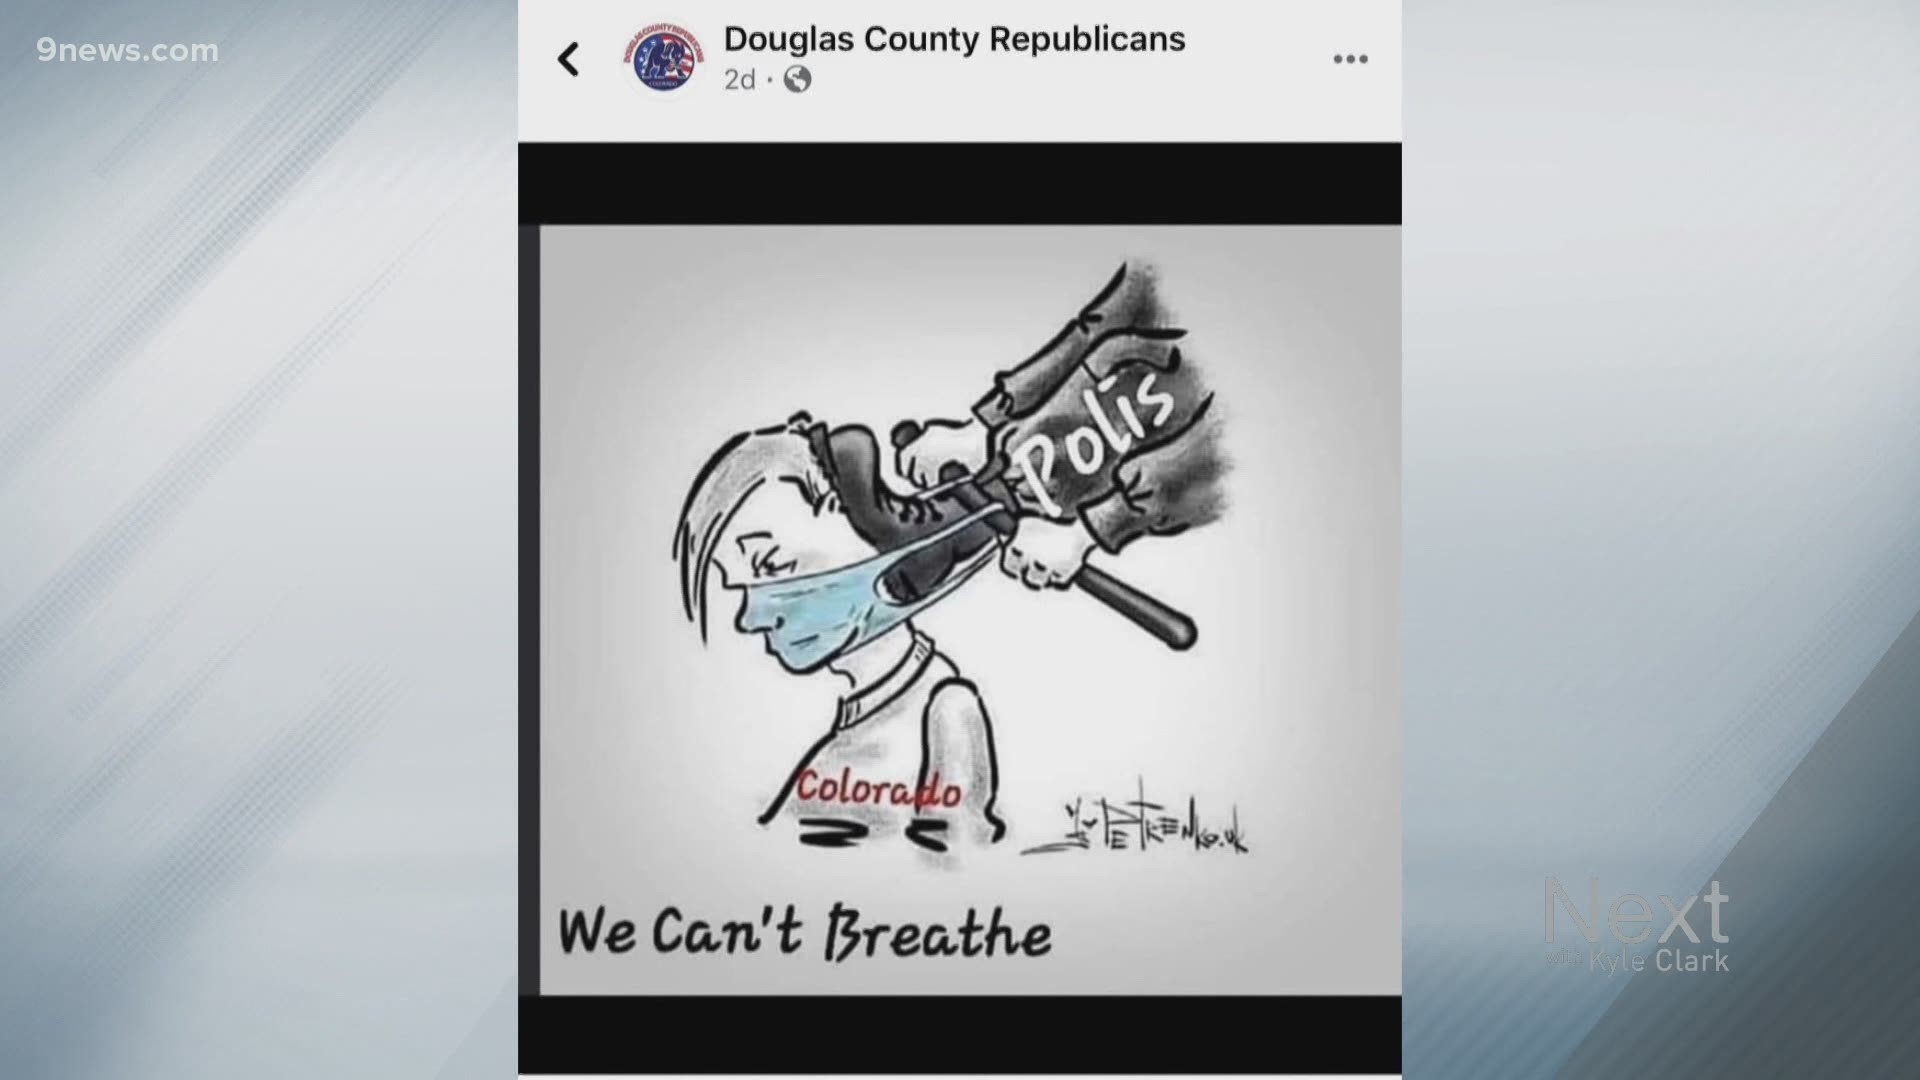 Gov. Polis bluntly called out people who won't wear masks, as the Douglas County GOP posted a comparison between Polis' voluntary order and George Floyd's death.